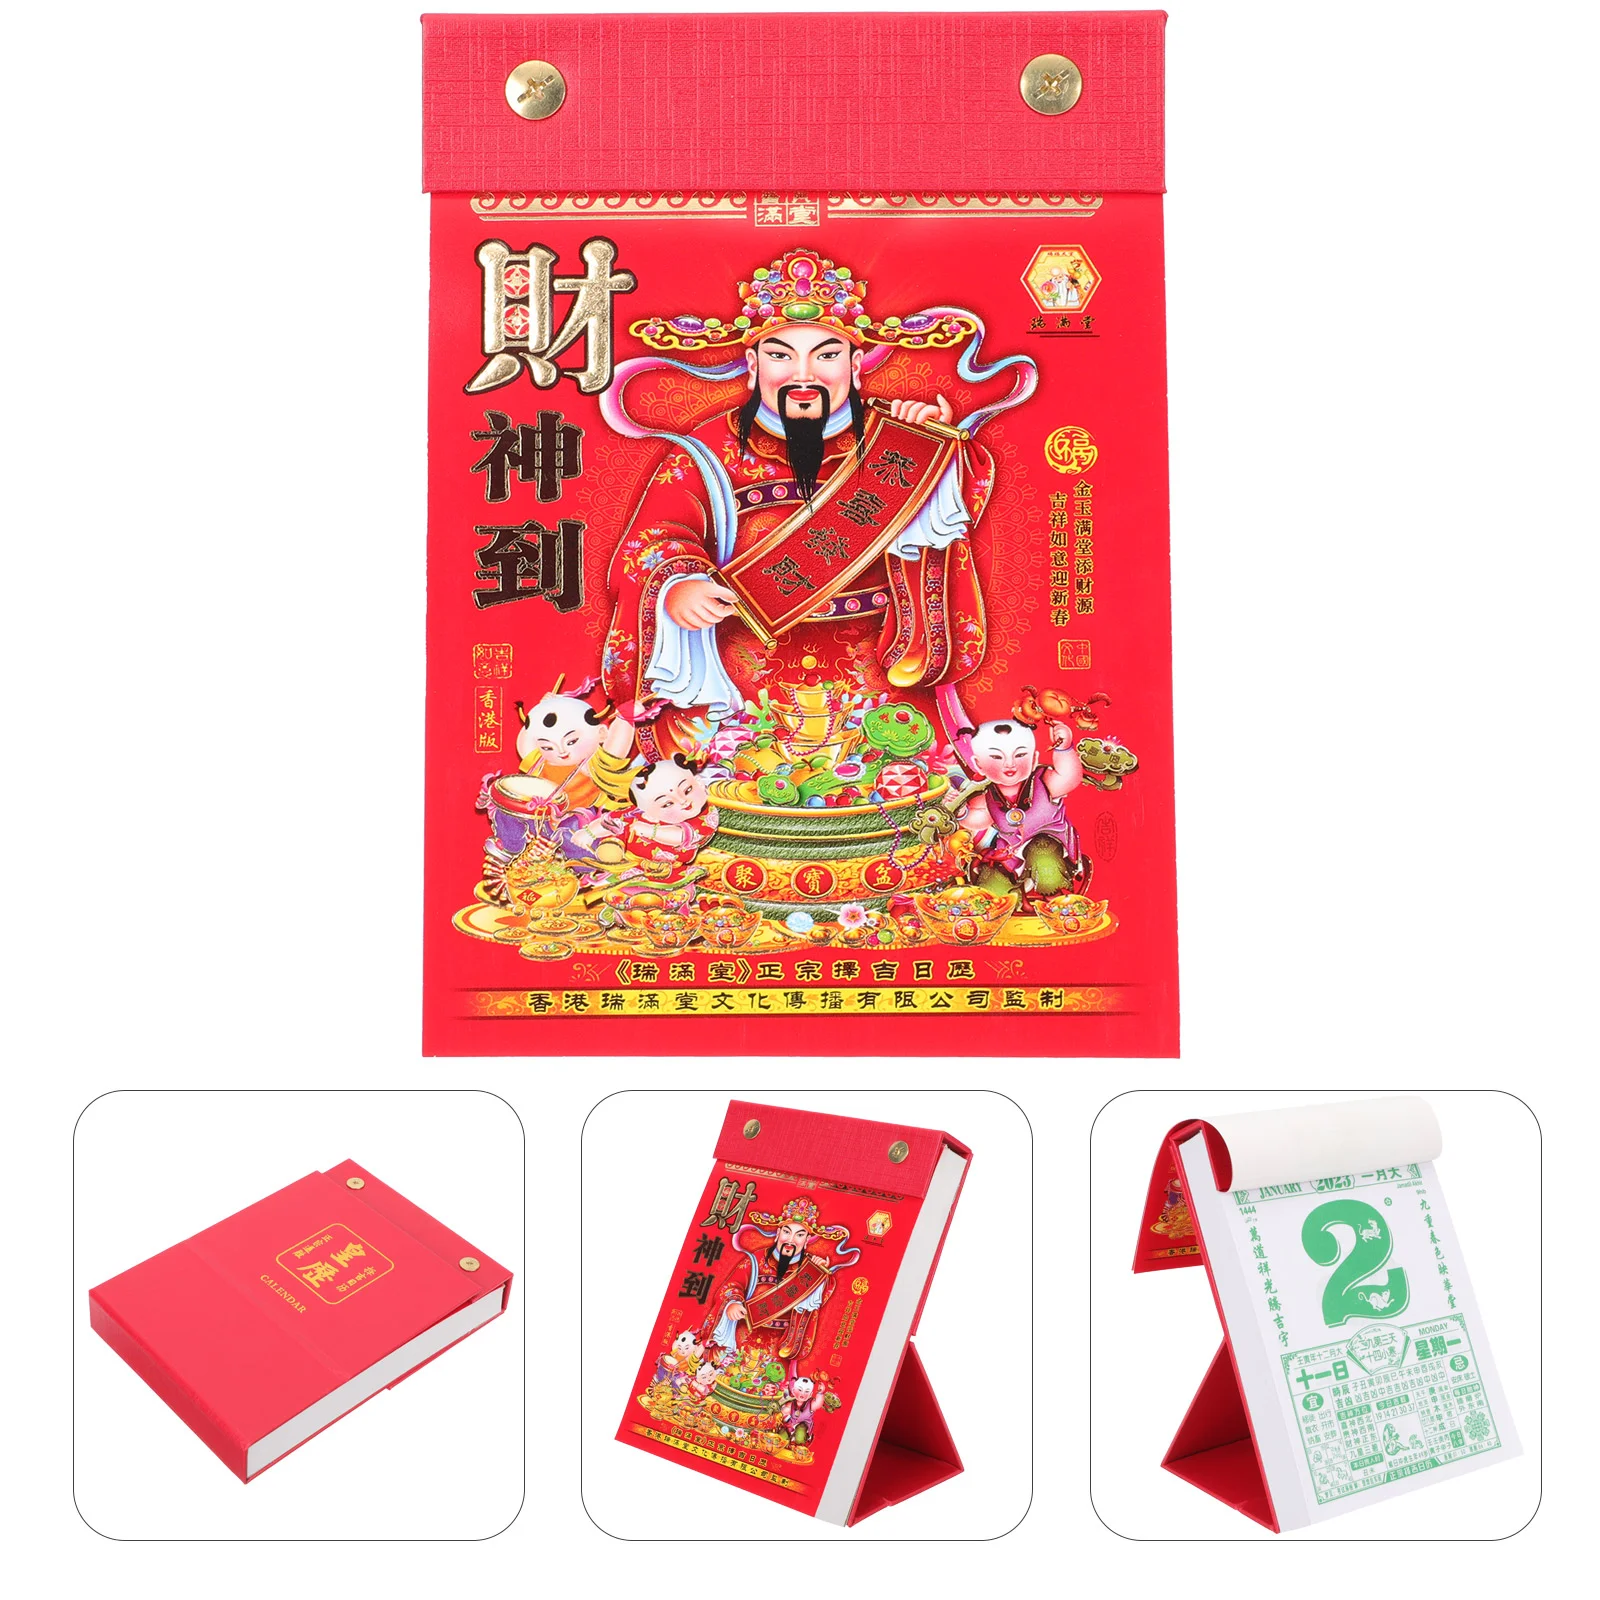 

Calendar Chinese Year Lunar 2023 New Rabbit Deskwall Daily Ofmoon Planner Party Yearly Bunny Monthly Schedule Table The Zodiac